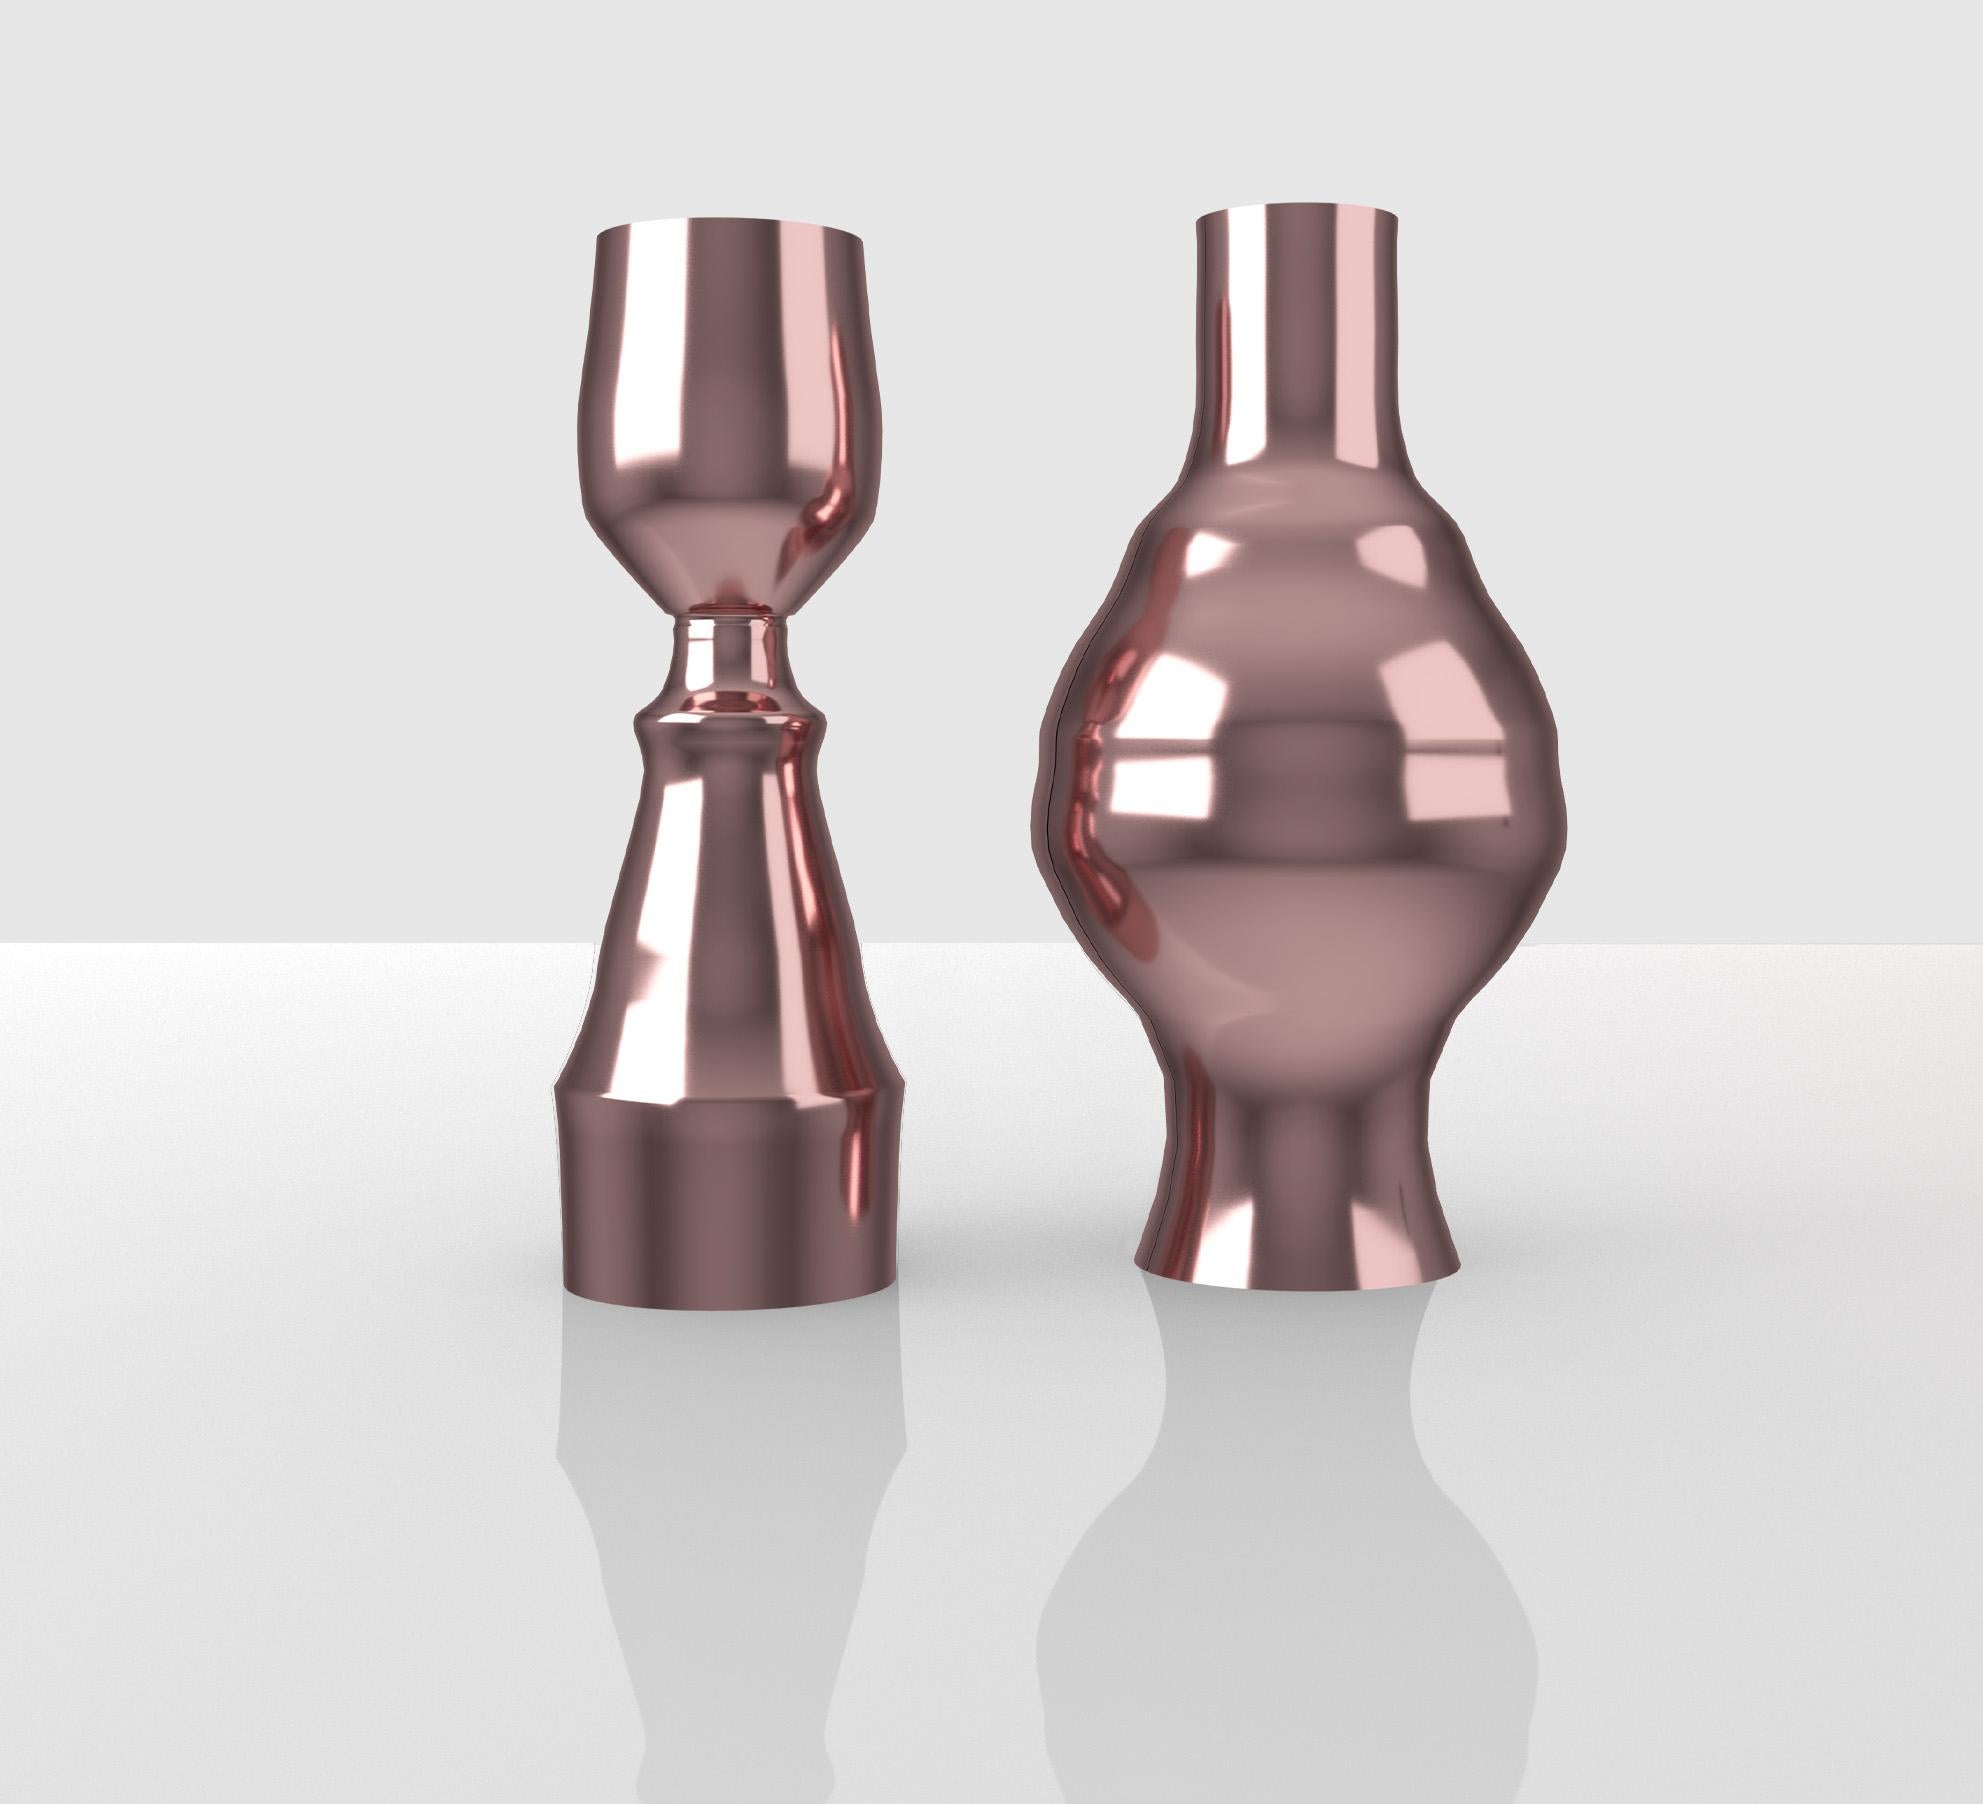 Discover this pair of varnished aluminum vases, meticulously crafted. Between these vases emerges the elegant silhouette of a nude woman, delicately expressing the essence of femininity. It is the juxtaposition of negative space and form that